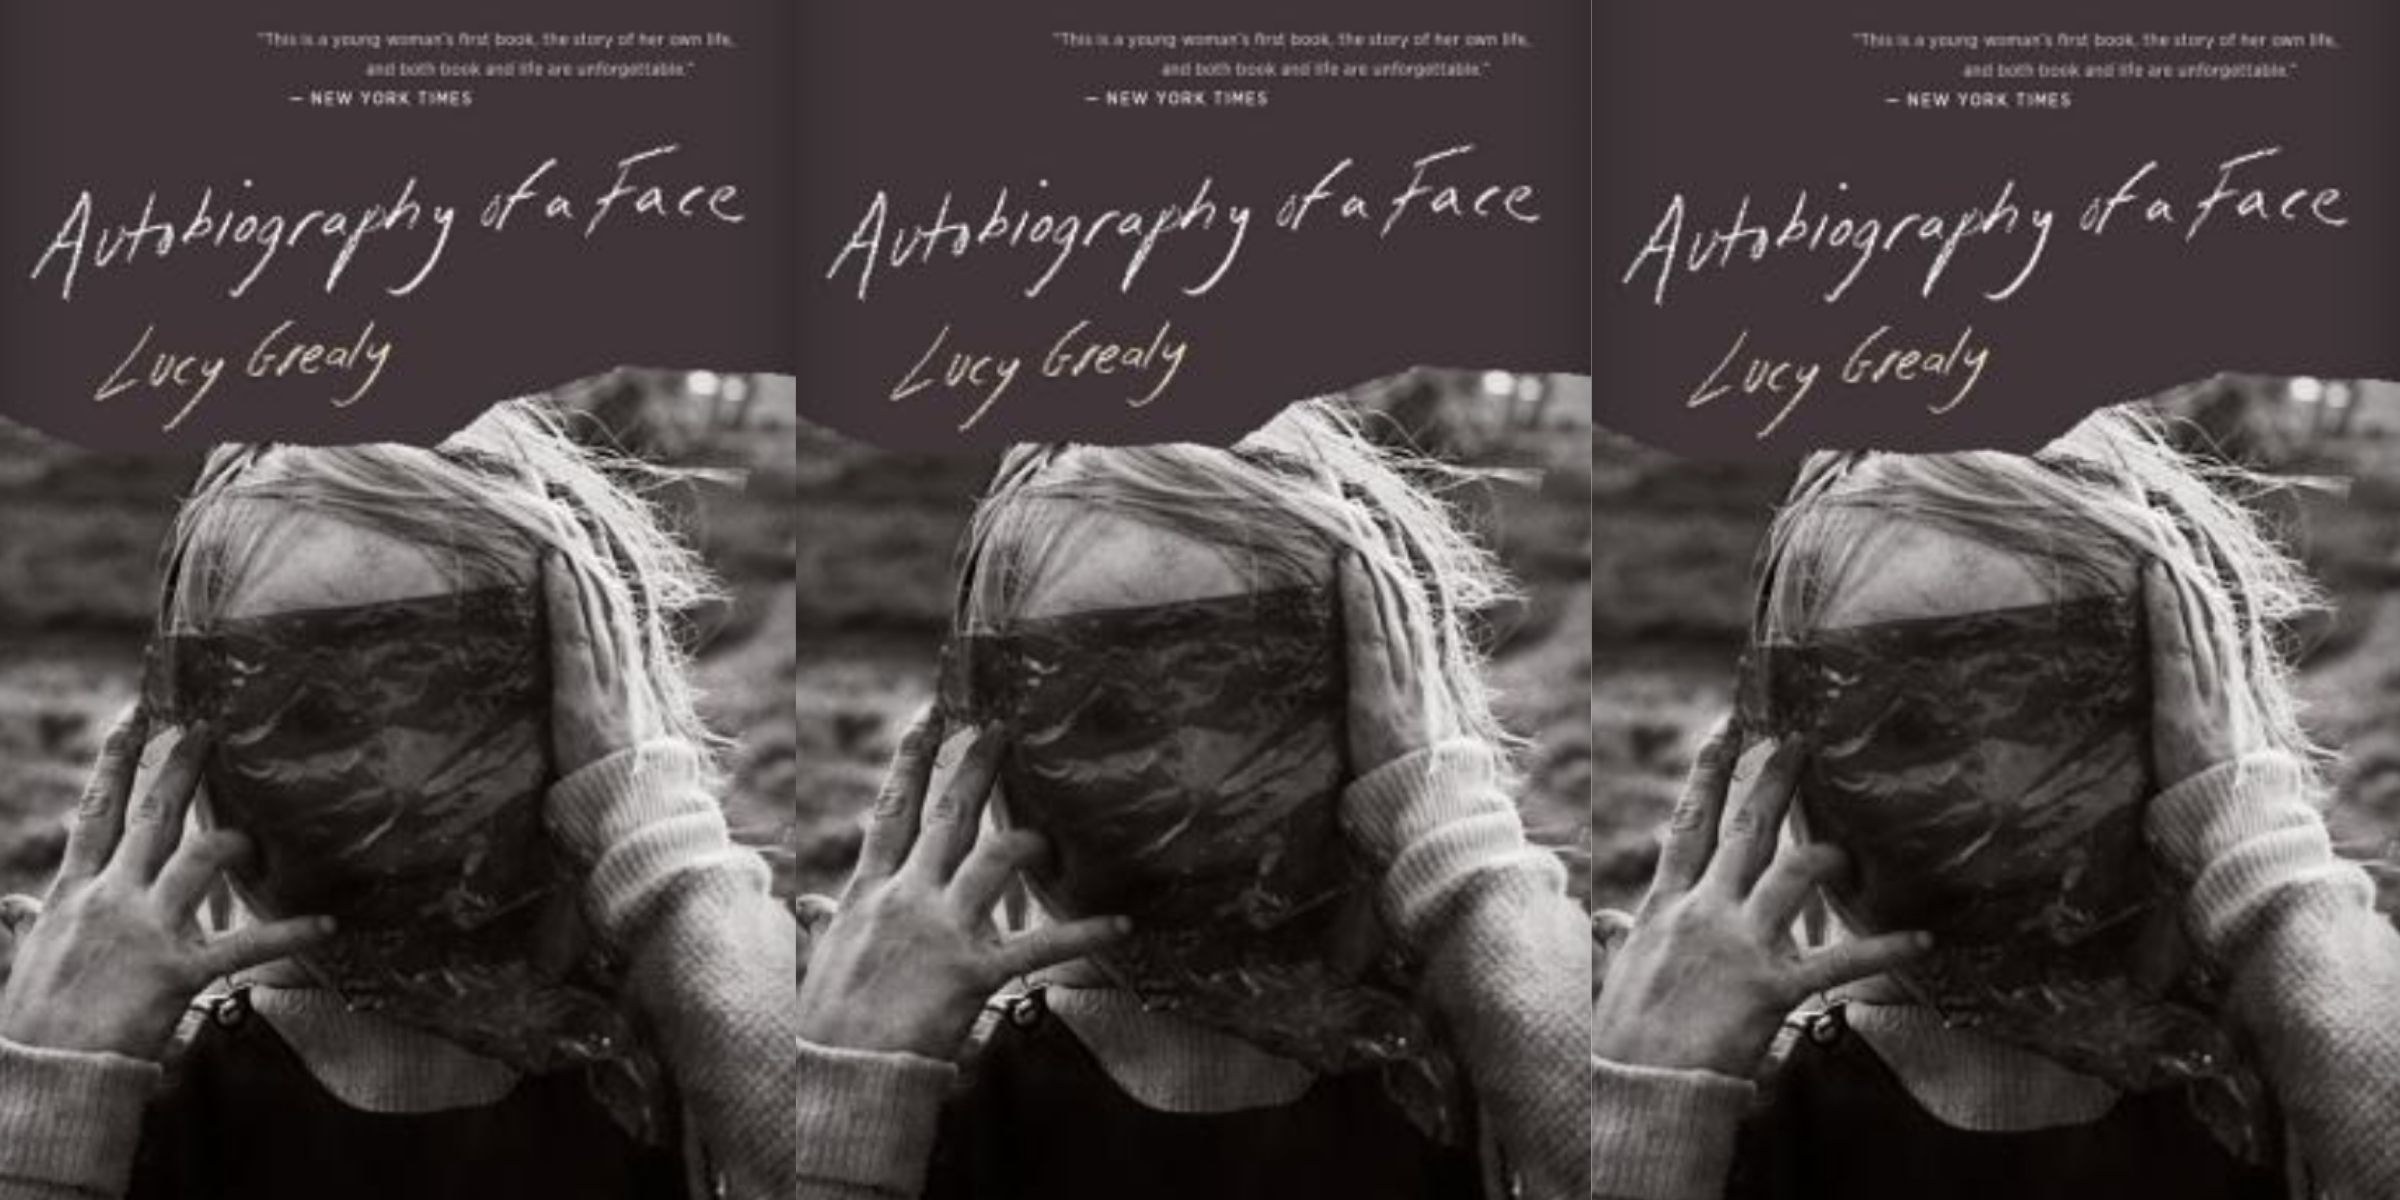 Cover of Autobiography of a Face